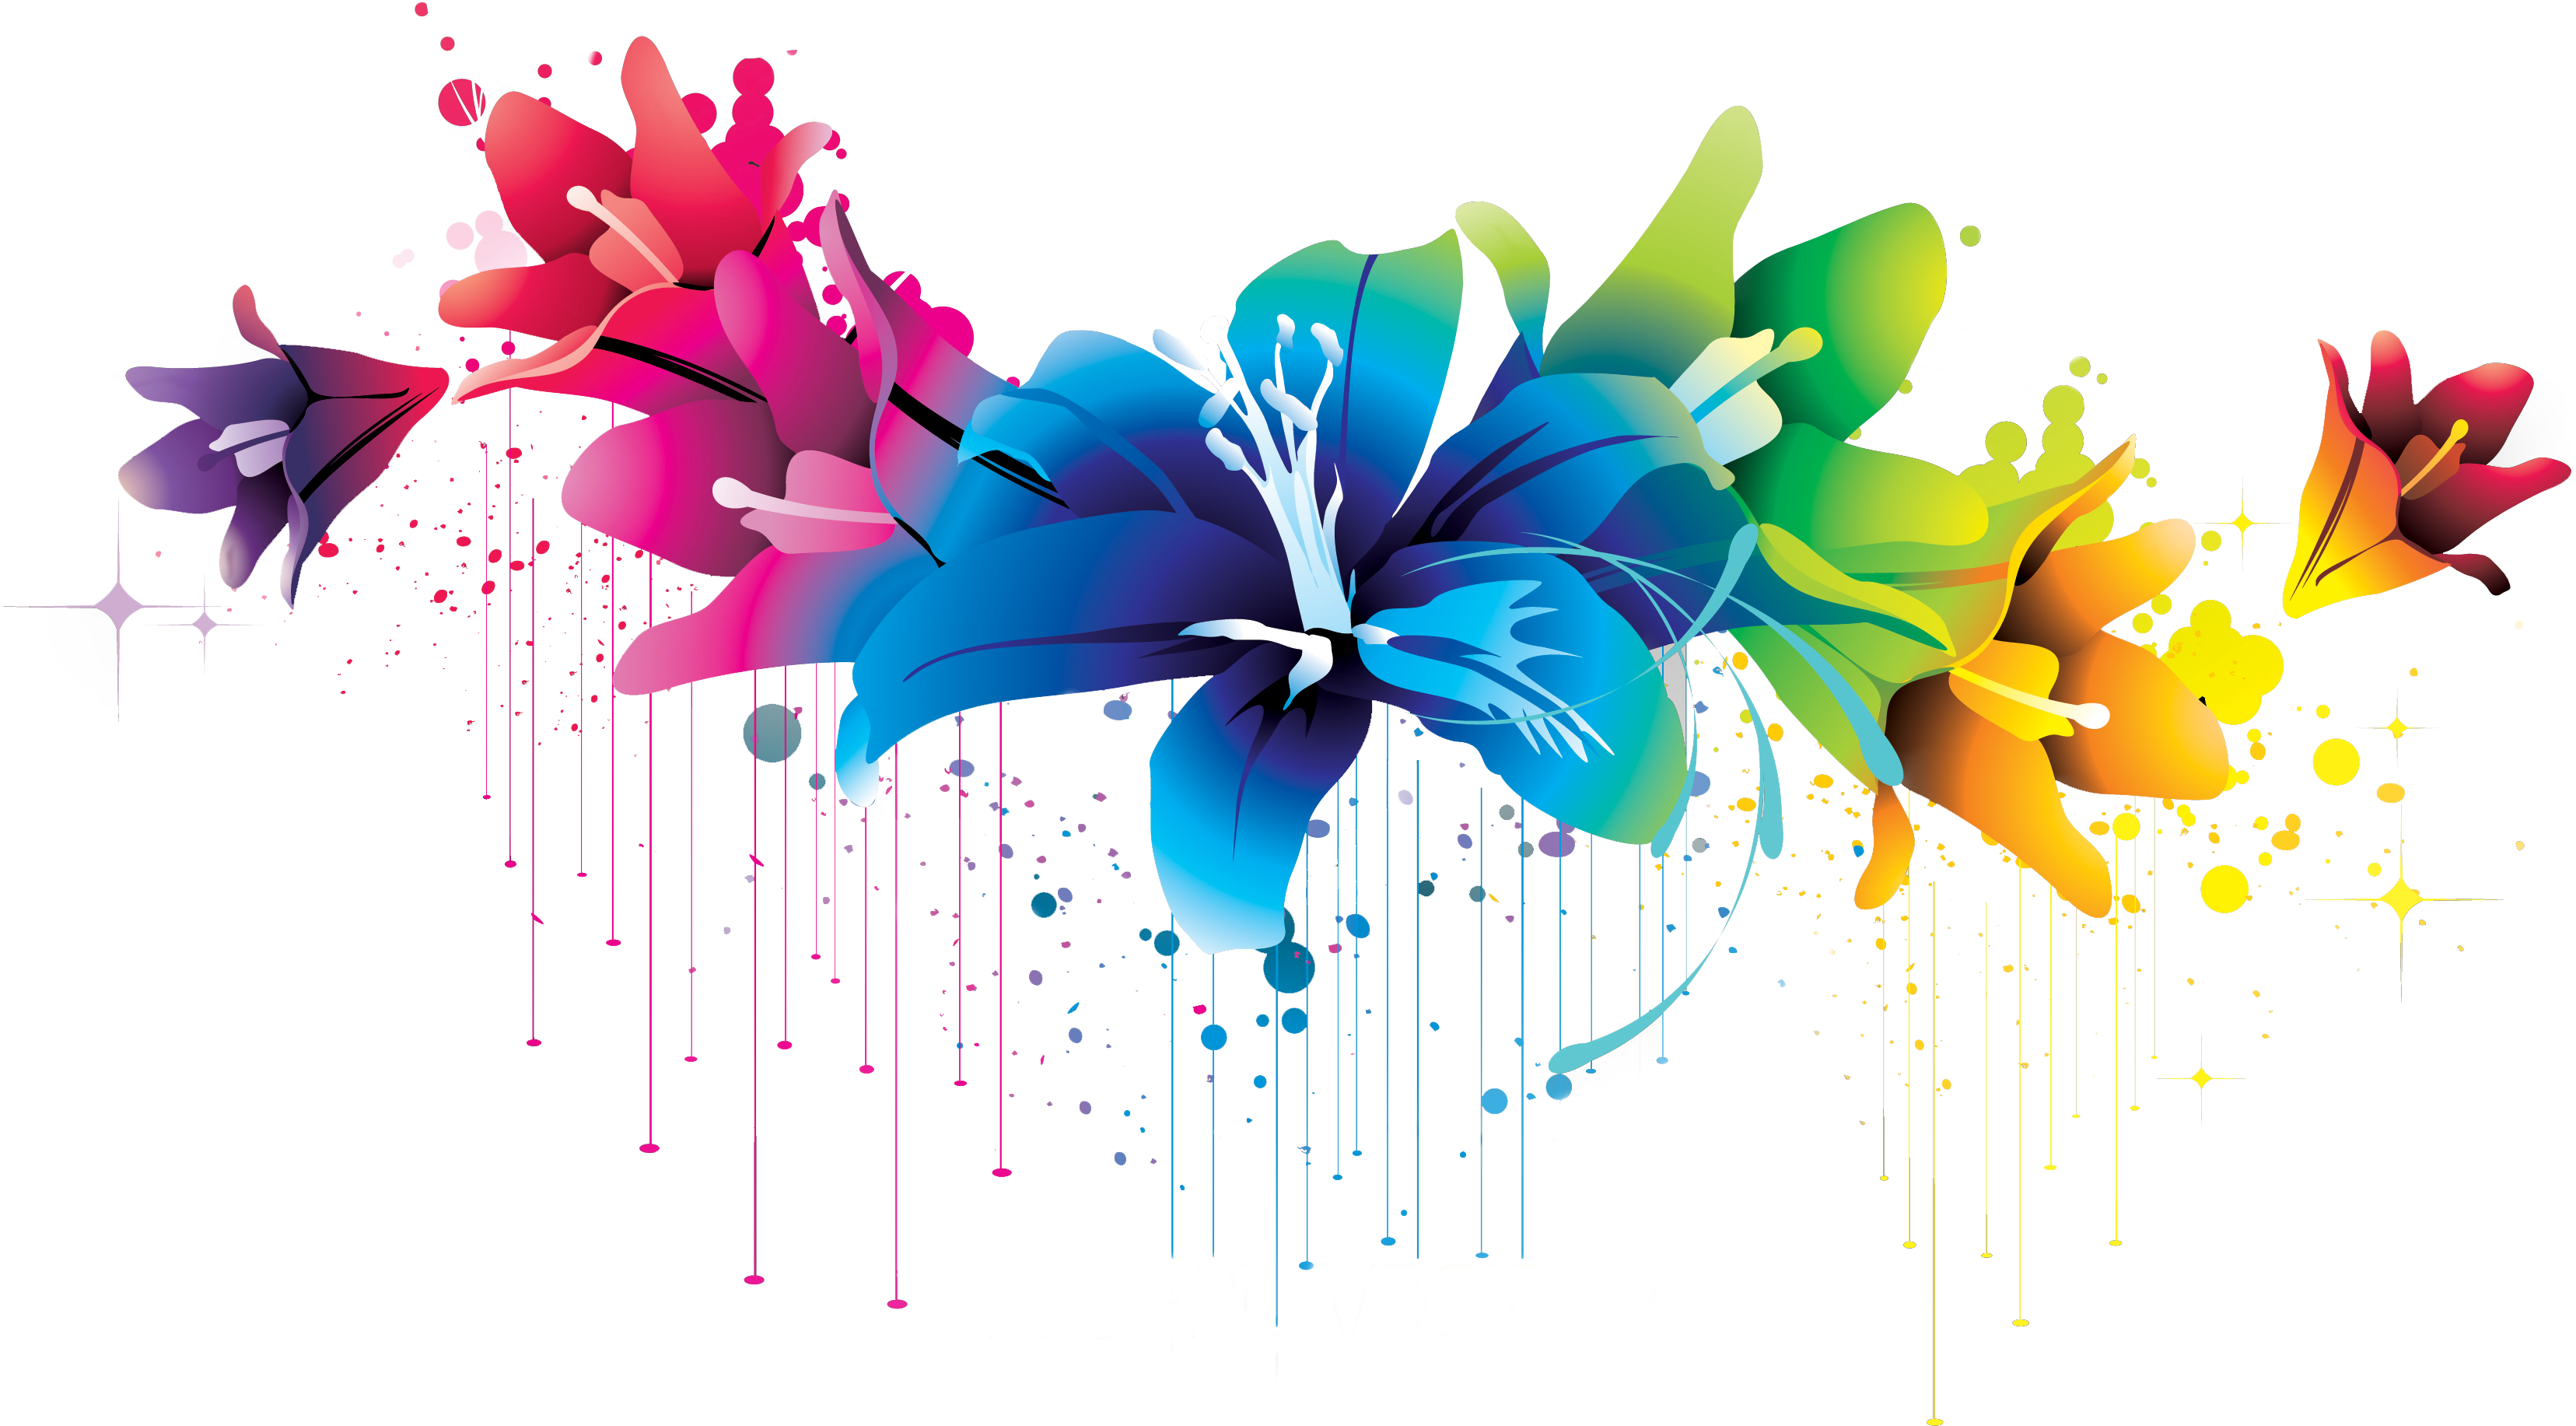 Download Flowers Vectors Png Images Transparent Gallery. Advertisement - Flowers Vectors, Transparent background PNG HD thumbnail